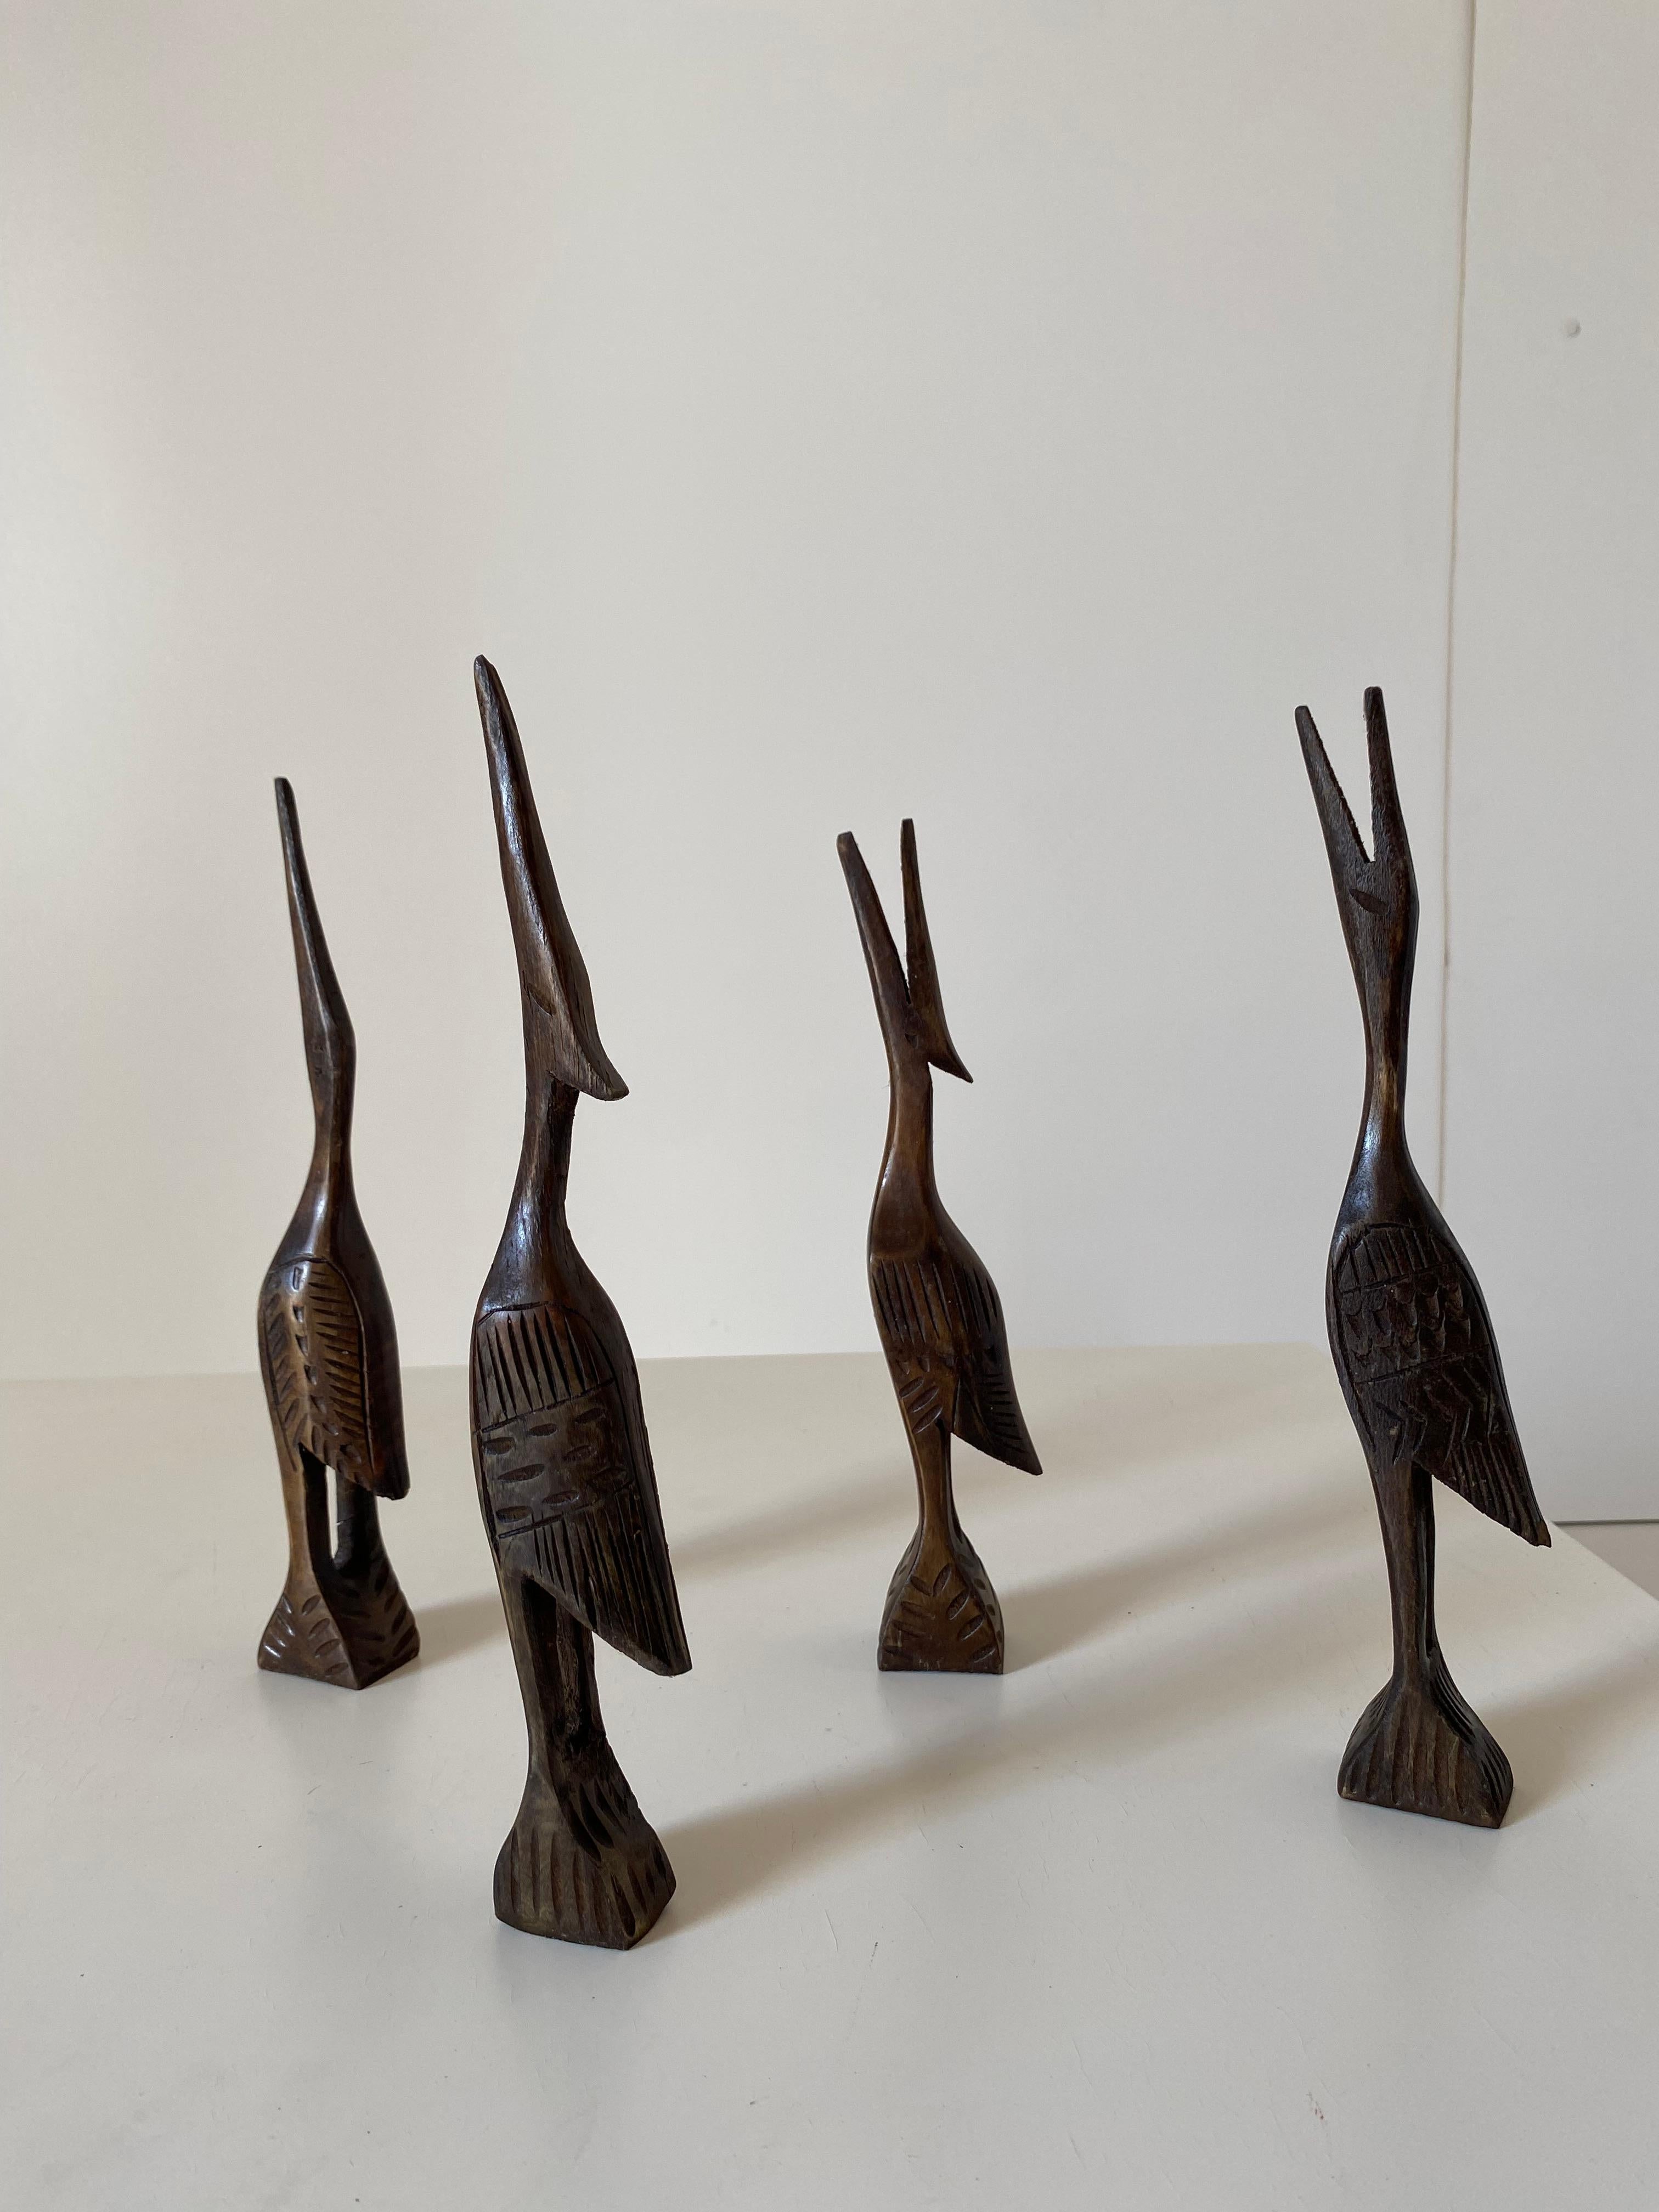 Vintage sculptures, Inlaid Wood Birds, Italy 1960s
A set of four inlaid wood brids decorative sculptures. In very good conditions.